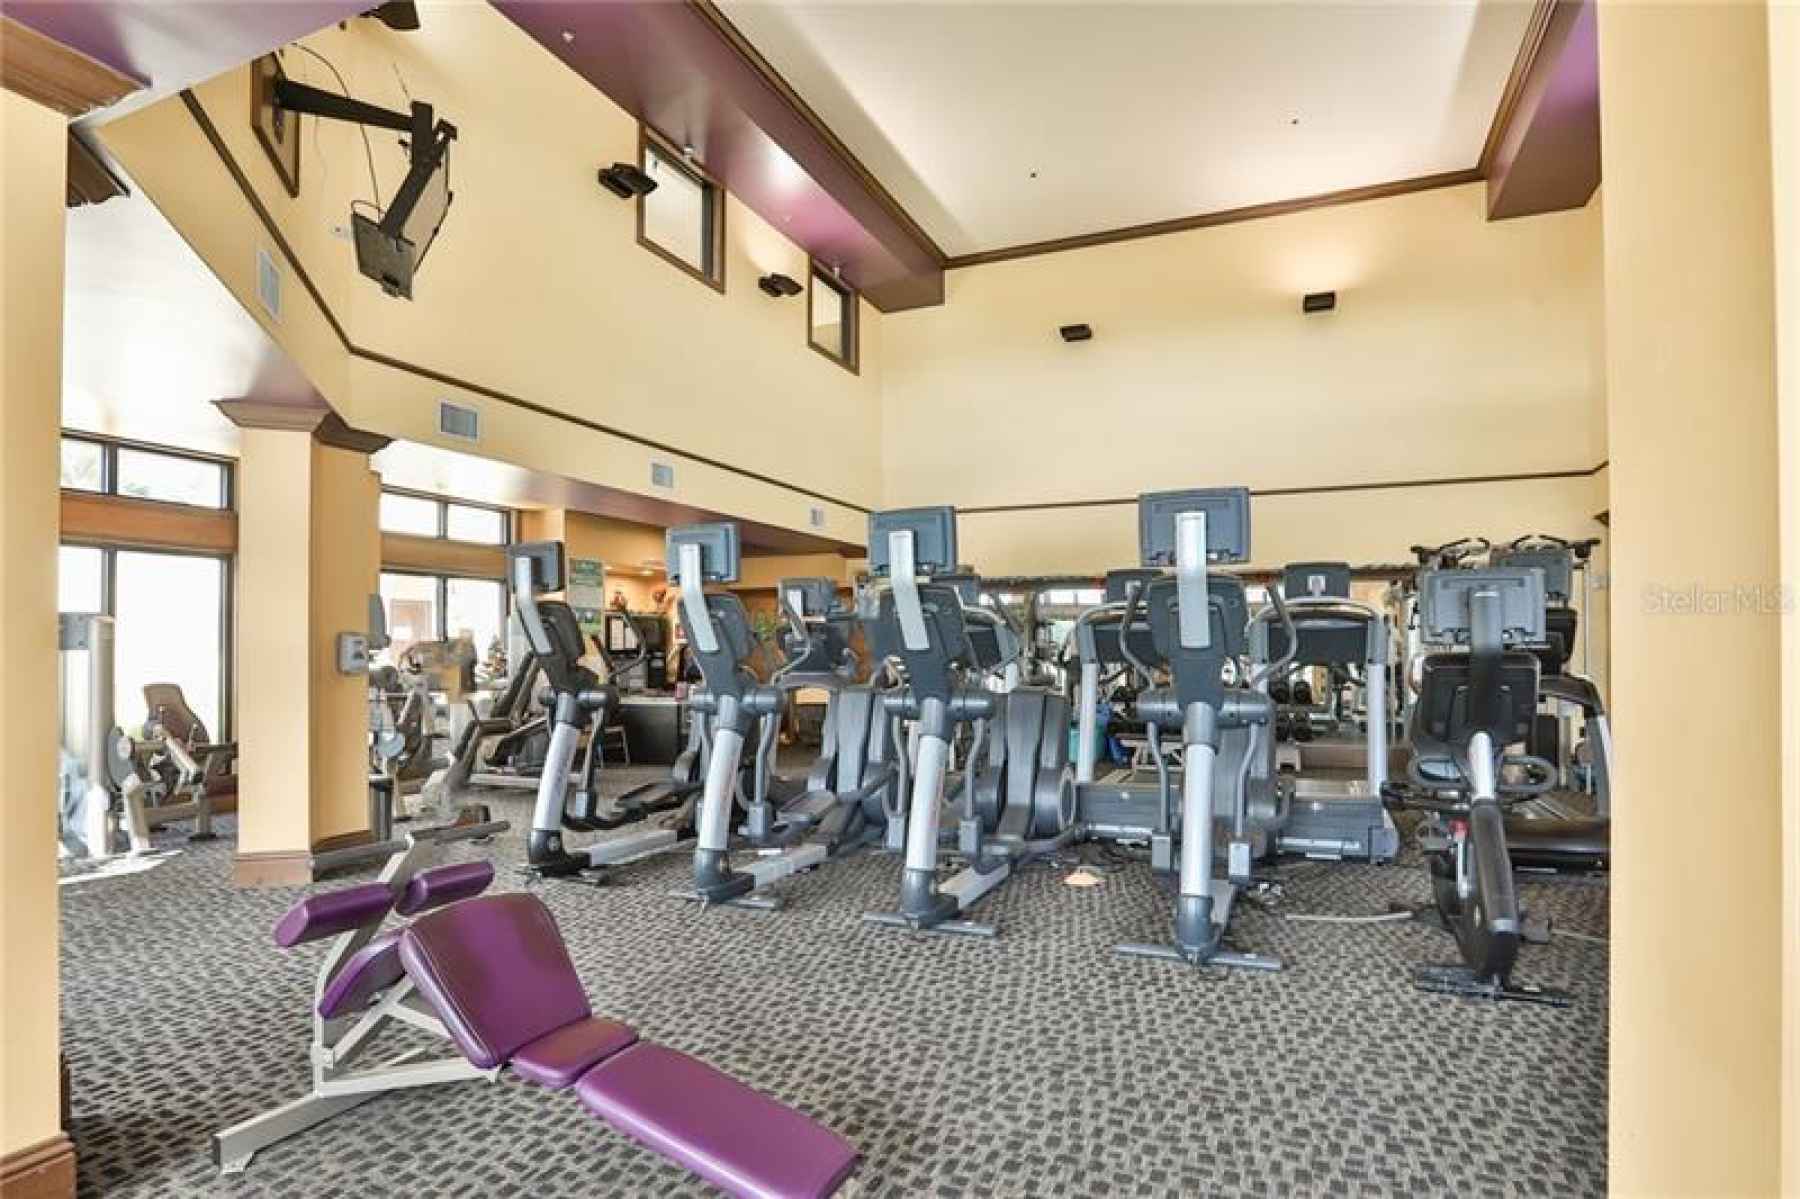 Renaissance Club has a contemporary fitness center and an indoor walking track, upstairs!